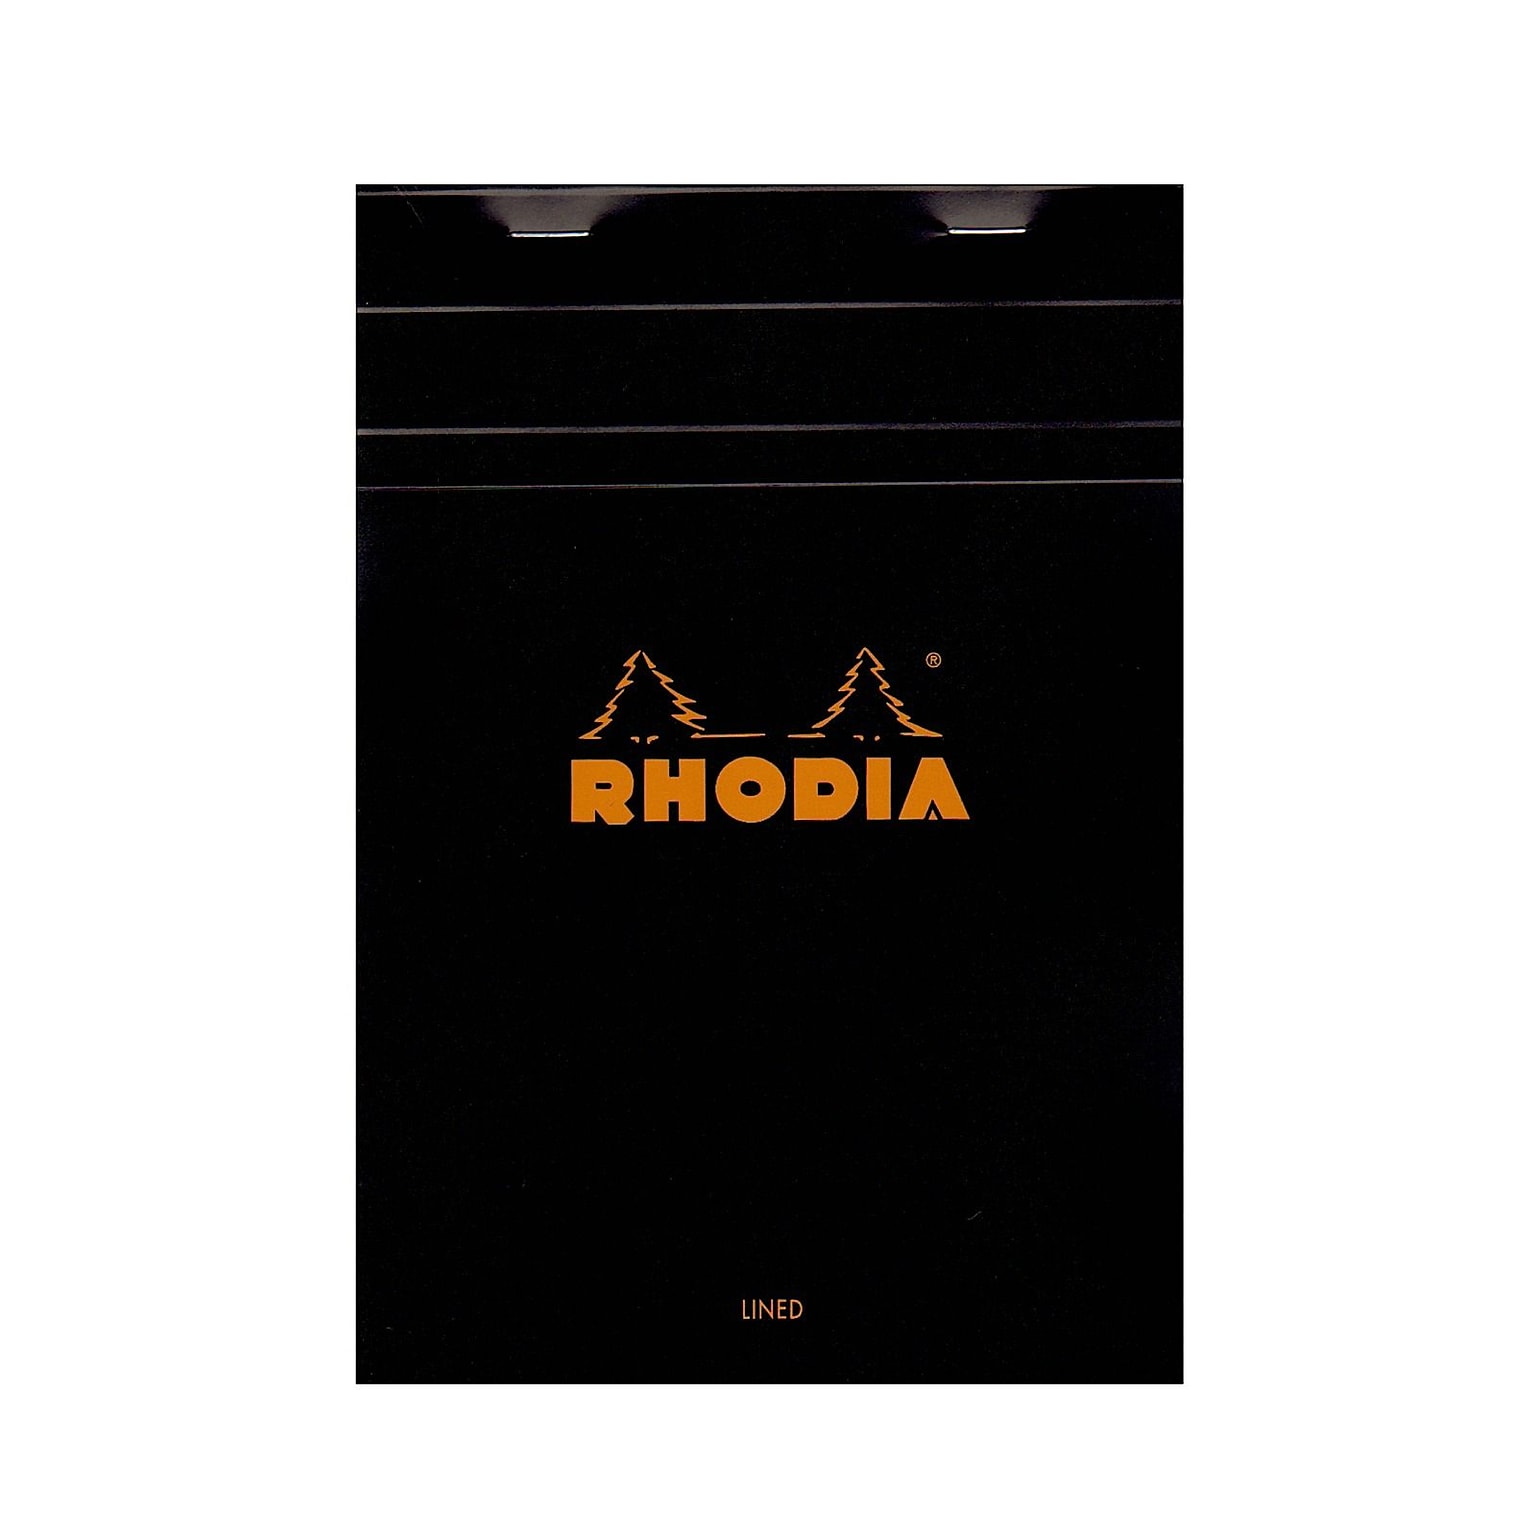 Rhodia Classic French Paper Pads Ruled With Margin 6 In. X 8 1/4 In. Black [Pack Of 4] (4PK-166009)